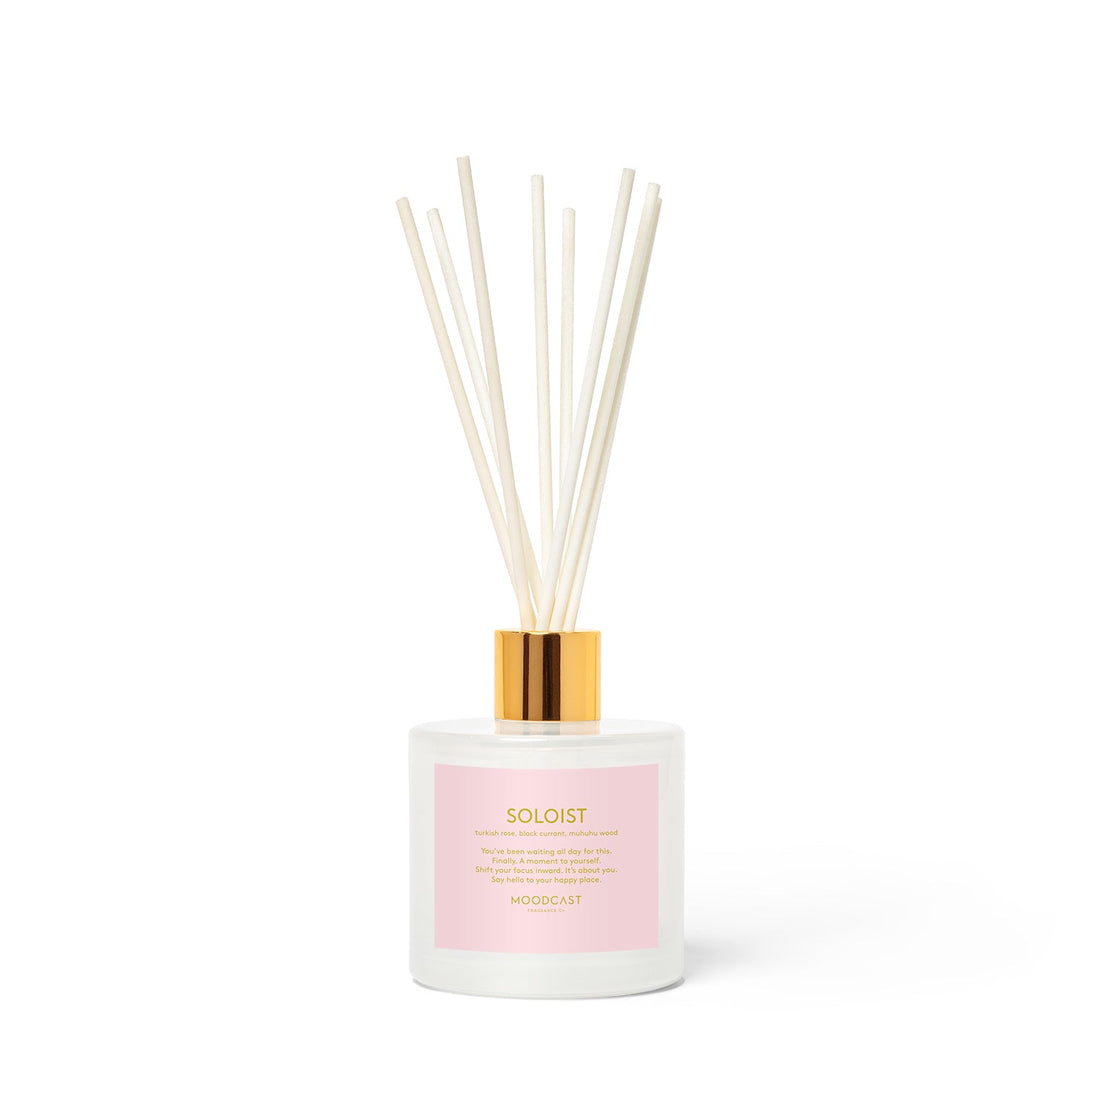 Soloist - Persona Collection (White & Gold) - 3.4fl oz/100ml Glass Reed Diffuser - Key Notes: Turkish Rose, Black Currant, Muhuhu Wood